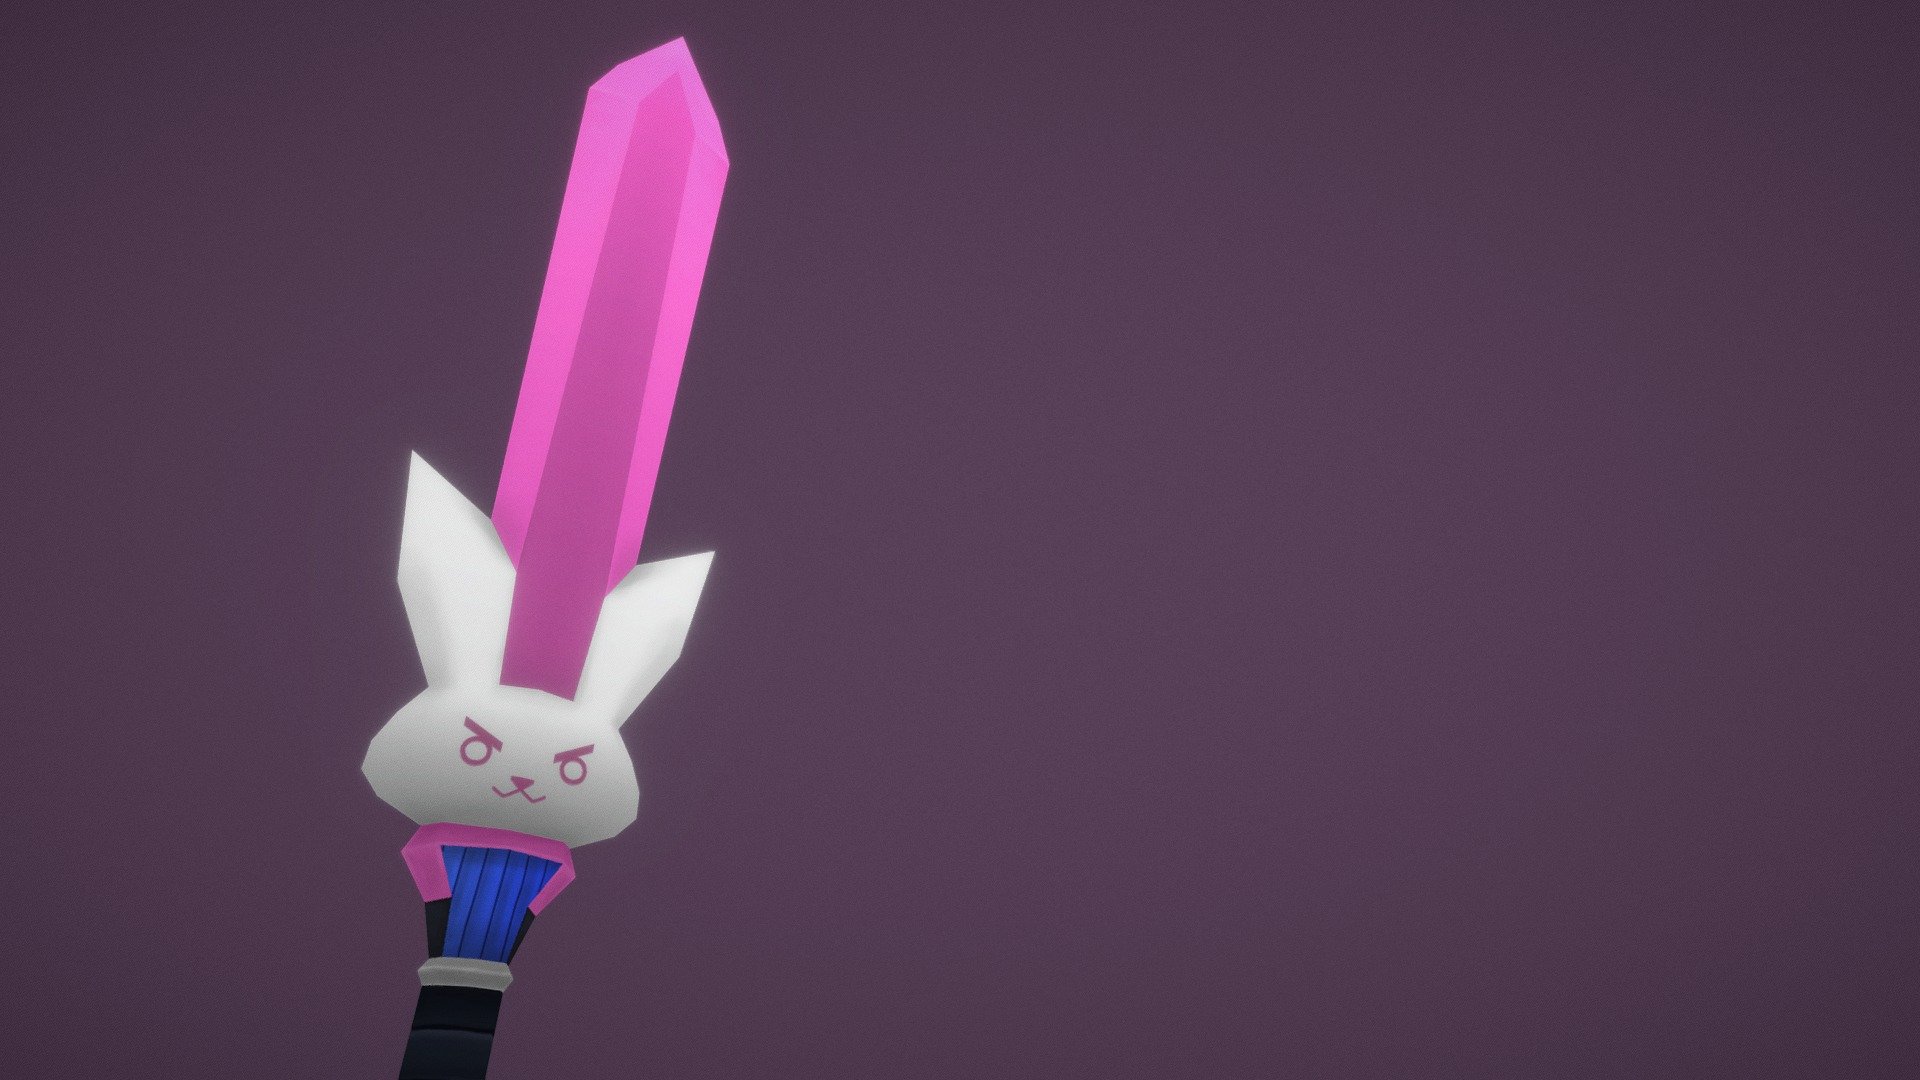 Low poly D.Va overwatch sword with handpainted texture. Studying 3d model